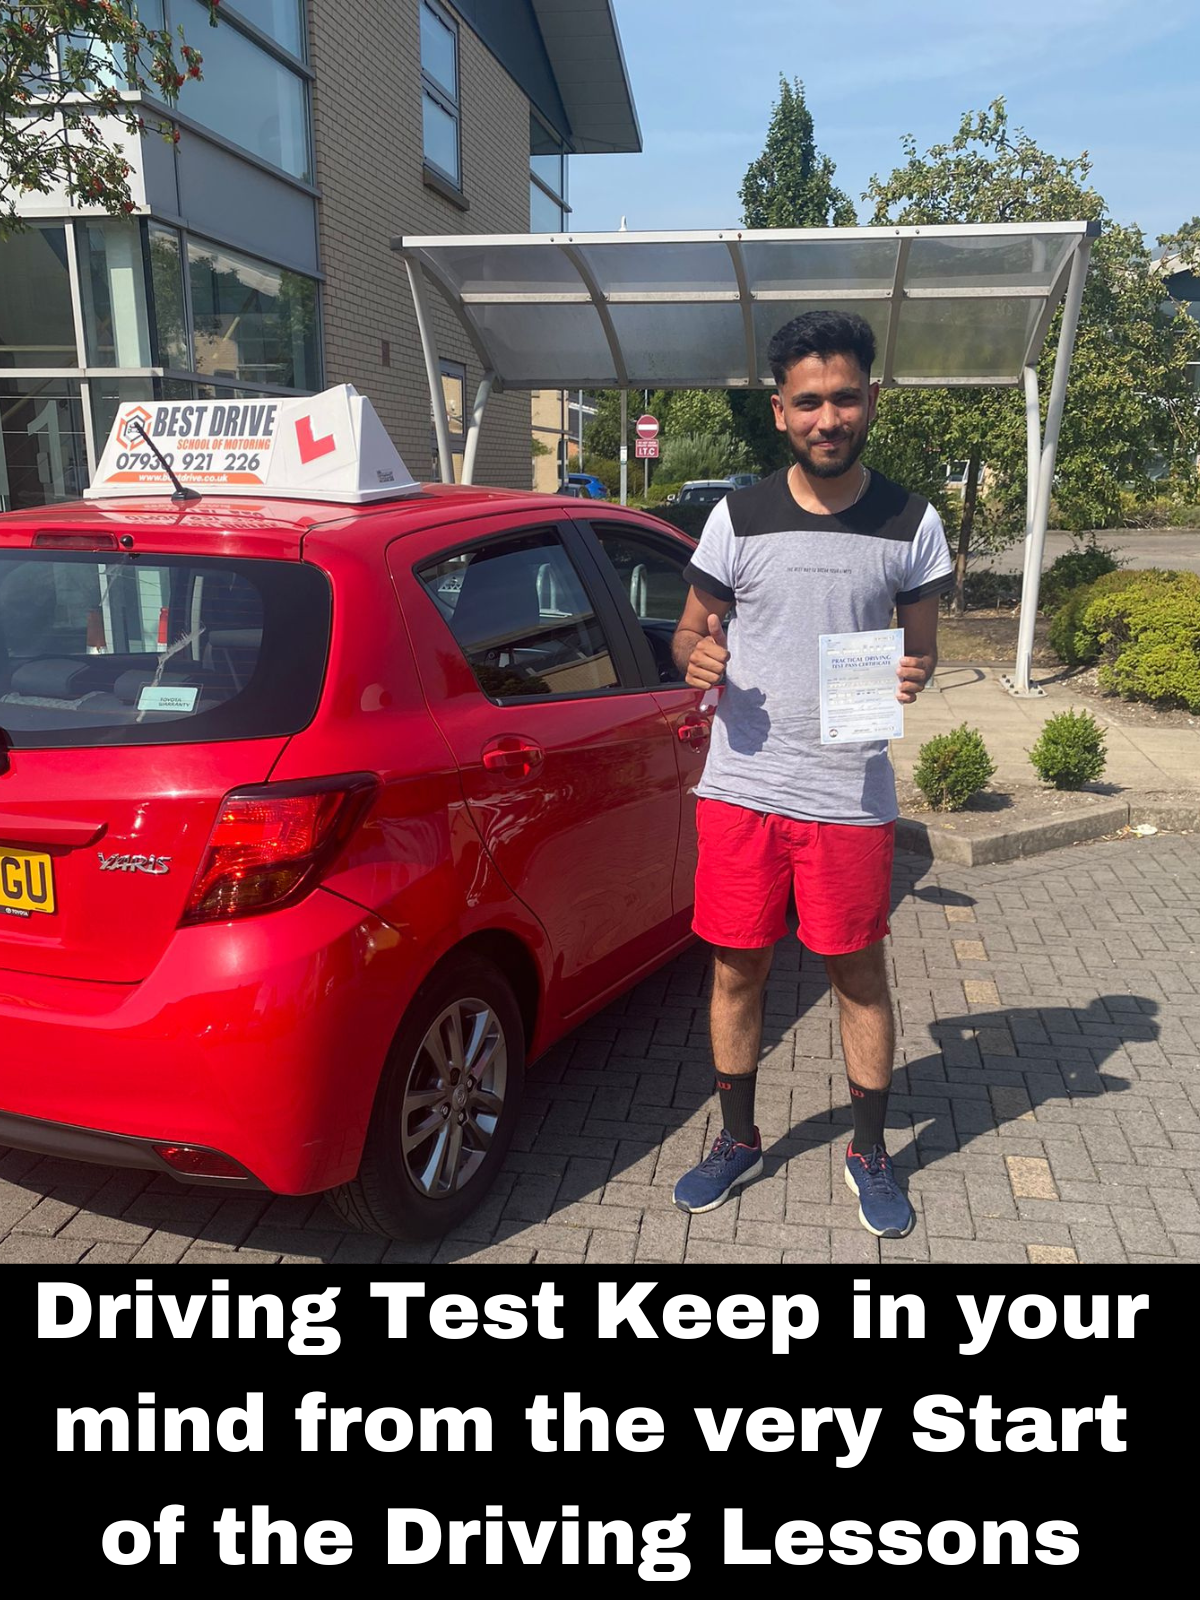 Driving Test Keep in your mind from the very Start of the Driving Lessons